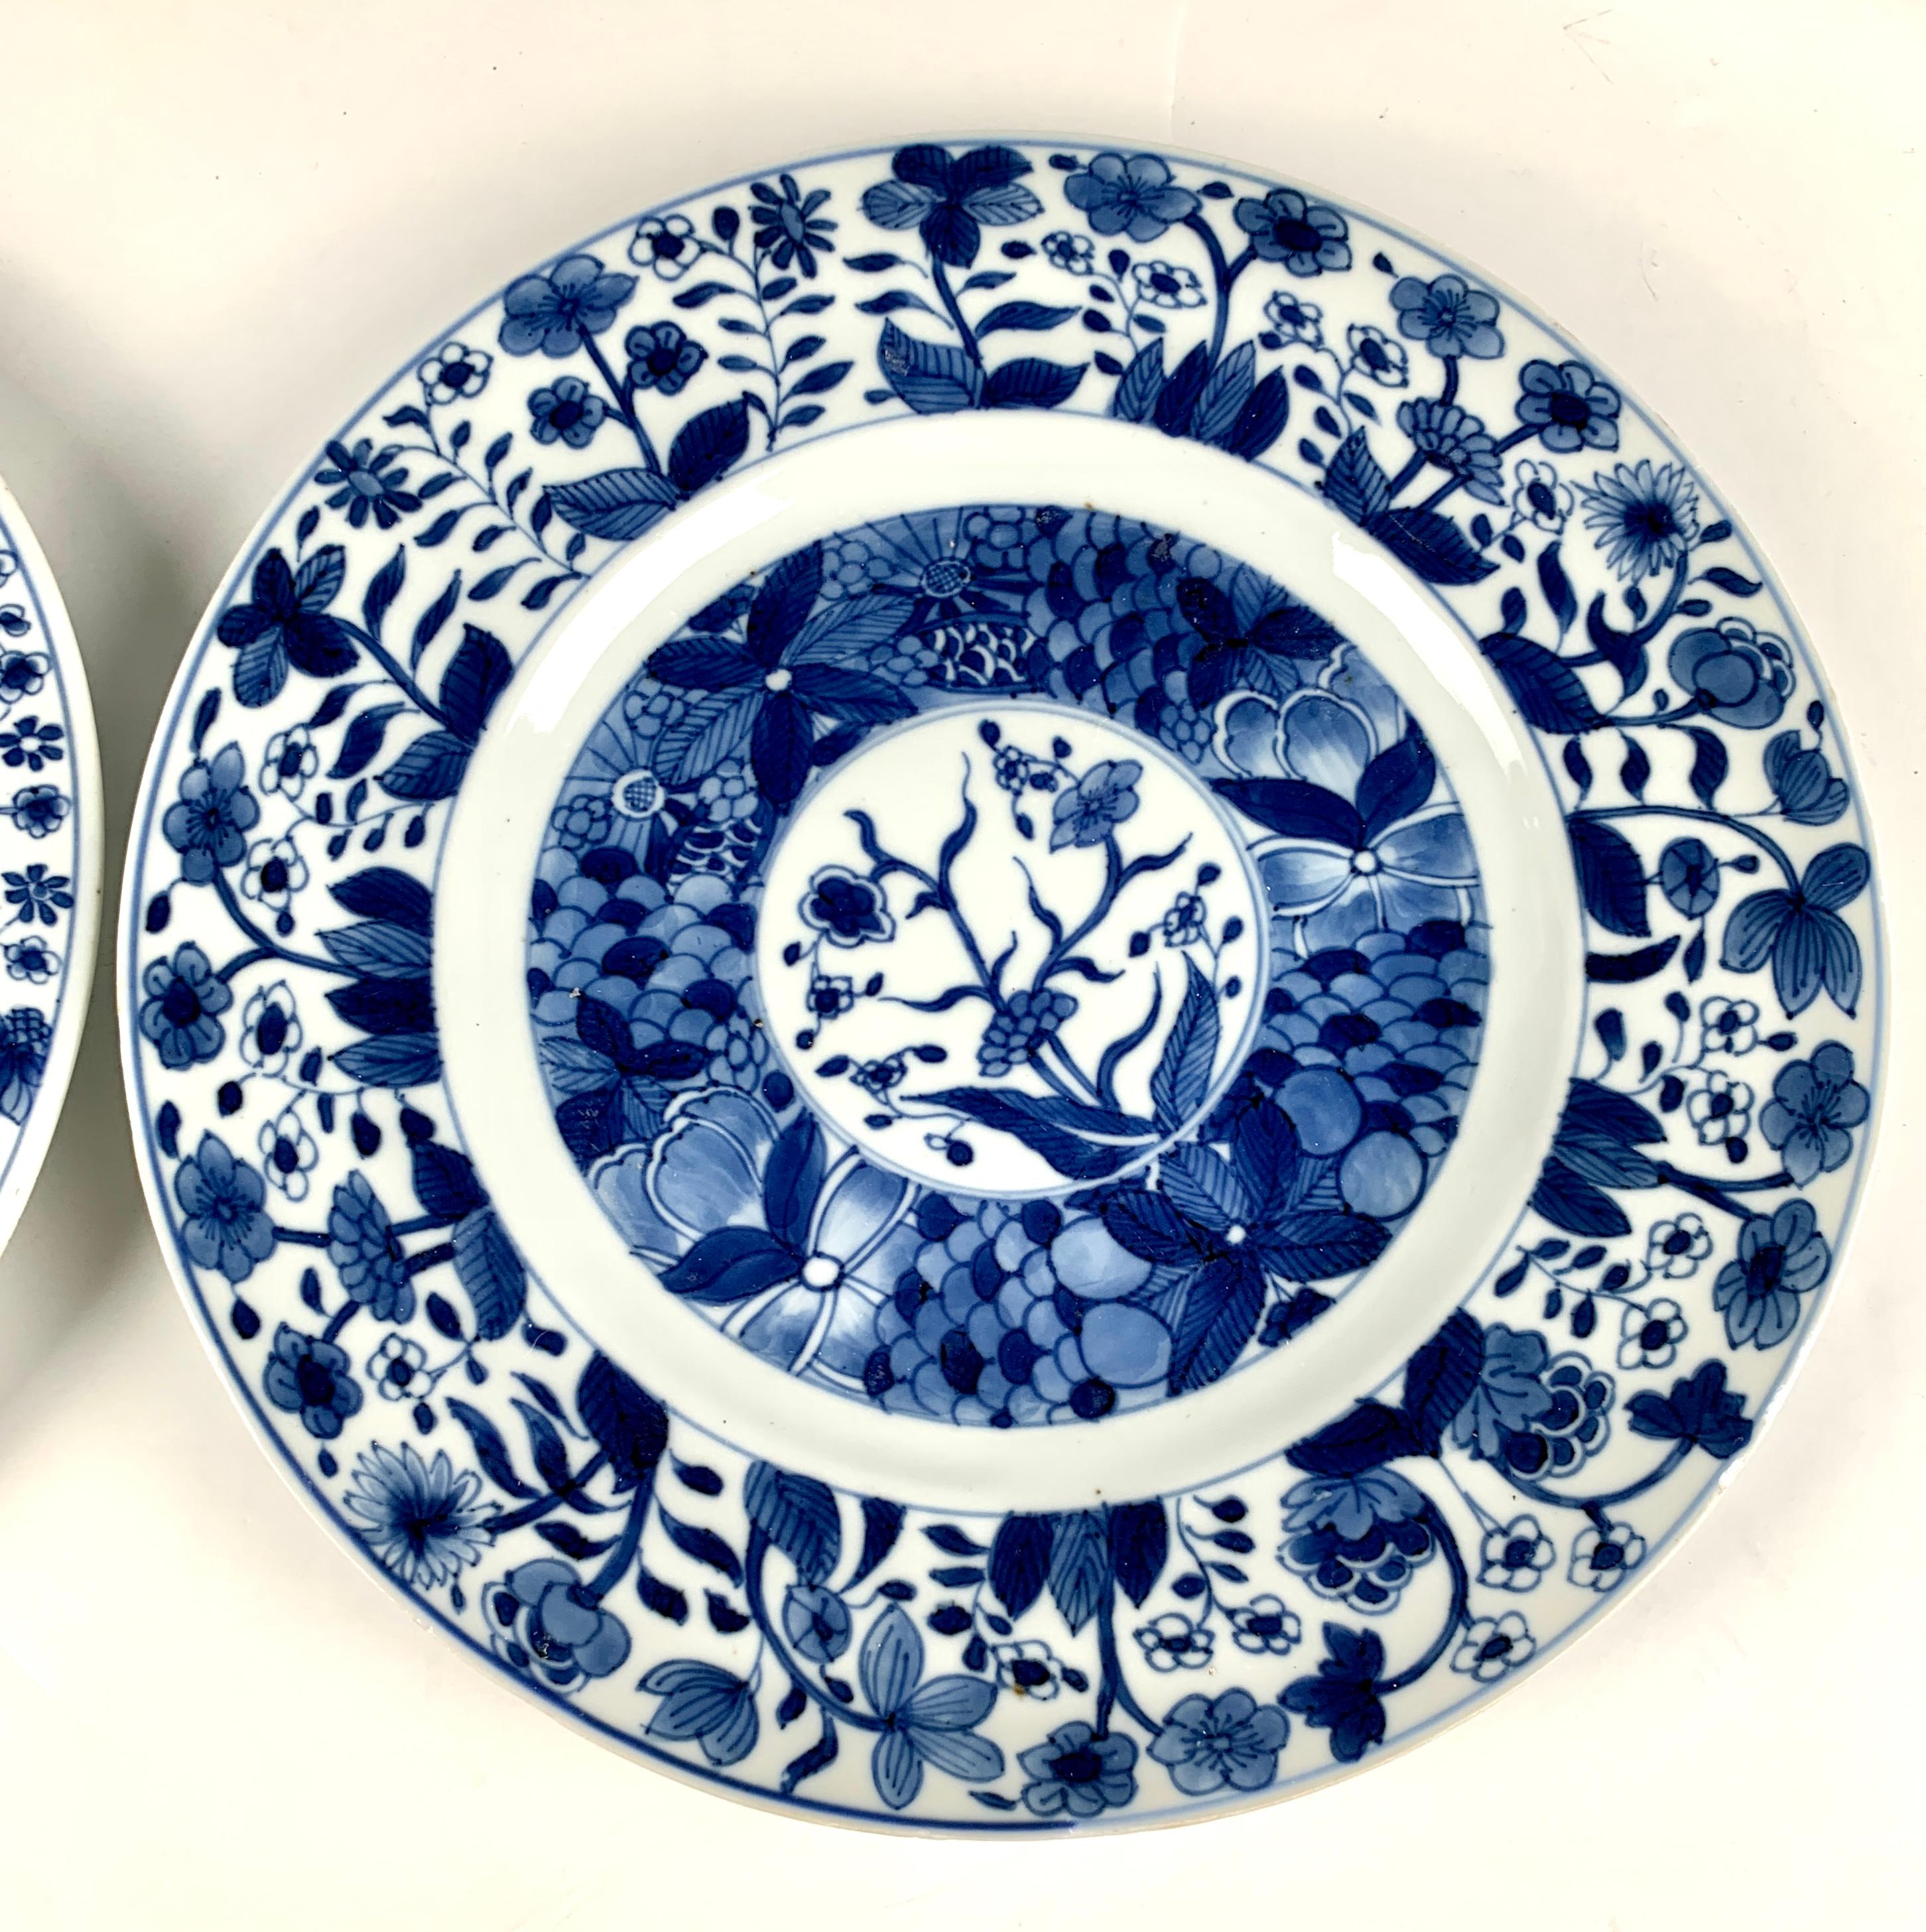 Six Blue and White Dishes Chinese Porcelain Hand Painted Kangxi Era, circa 1700 For Sale 1